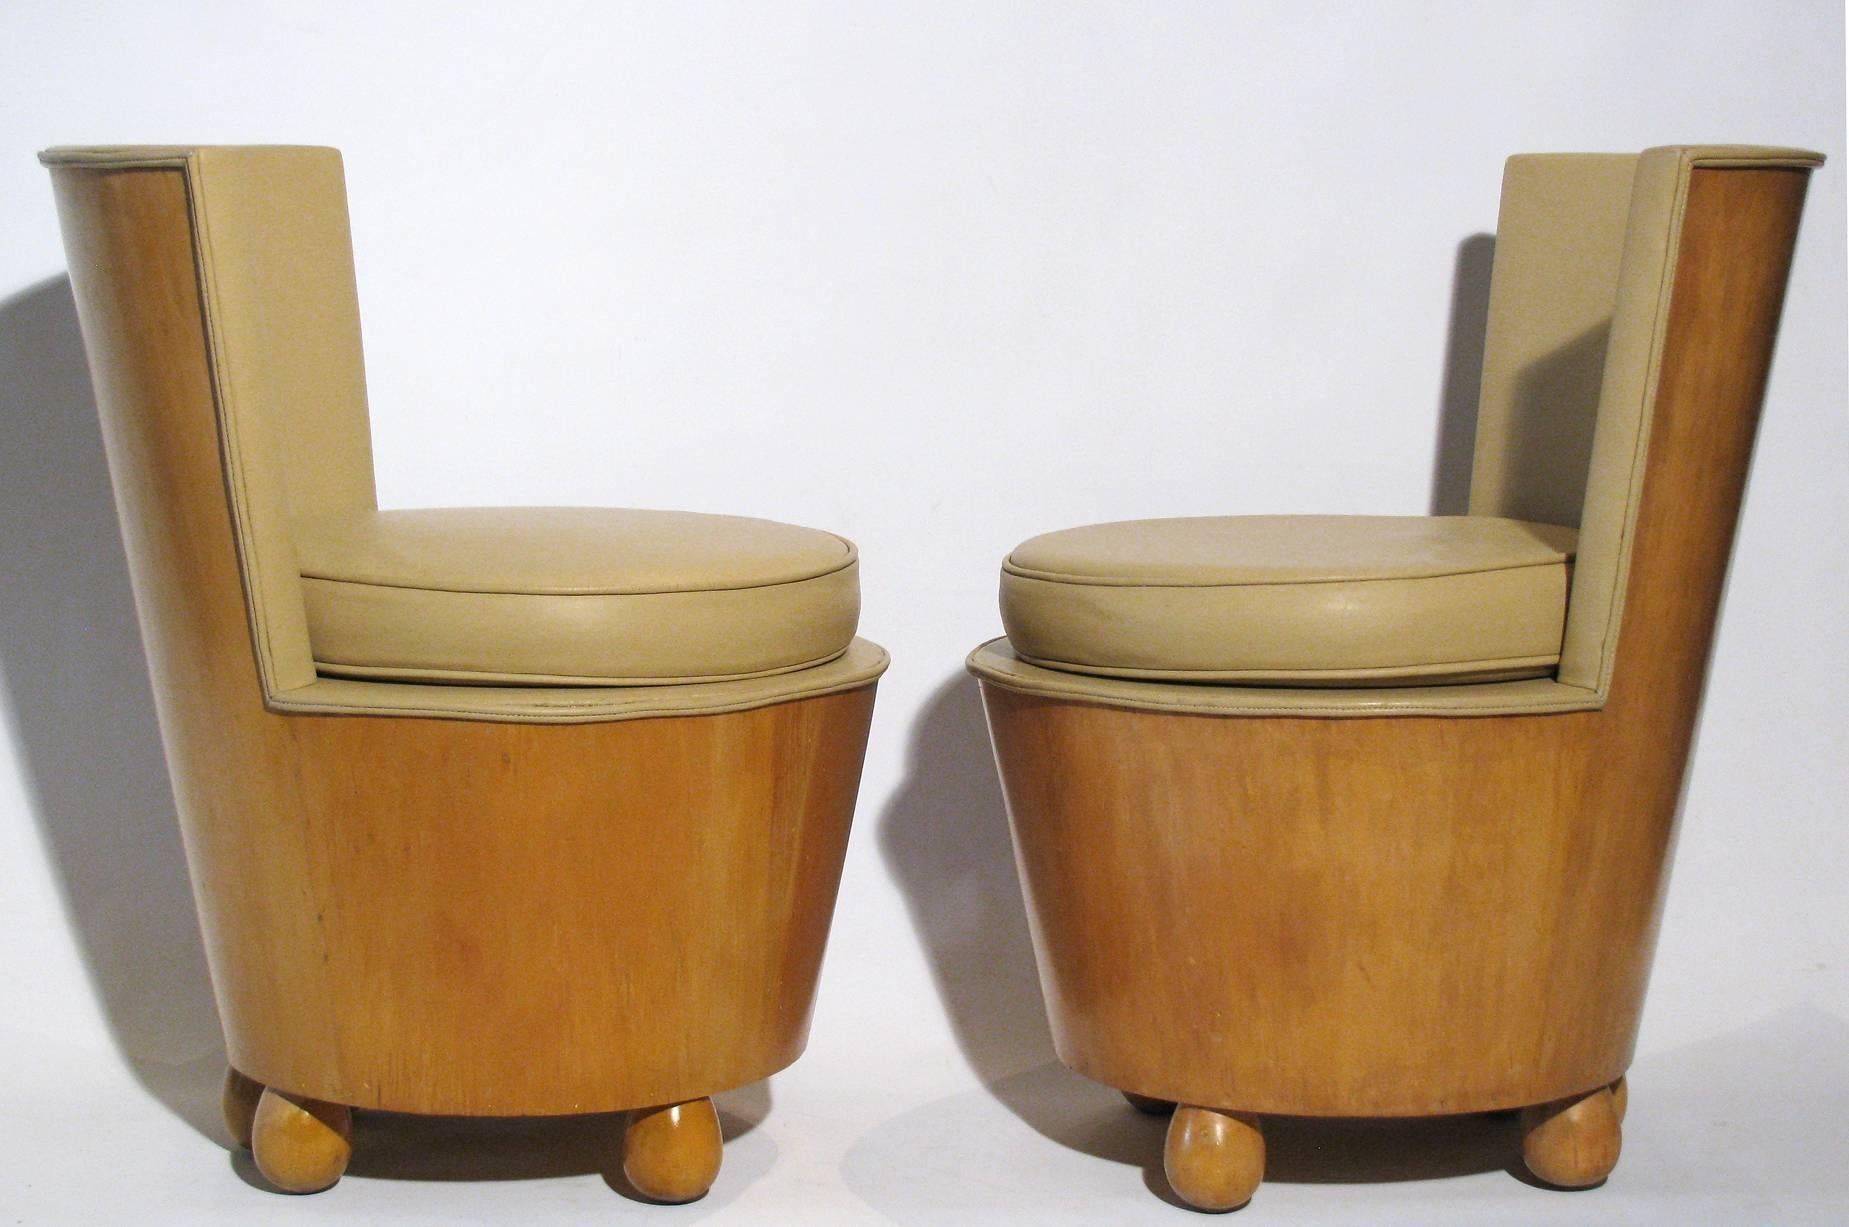 Art Deco Style Tub Chairs, Attributed to Elsie de Wolfe For Sale 2